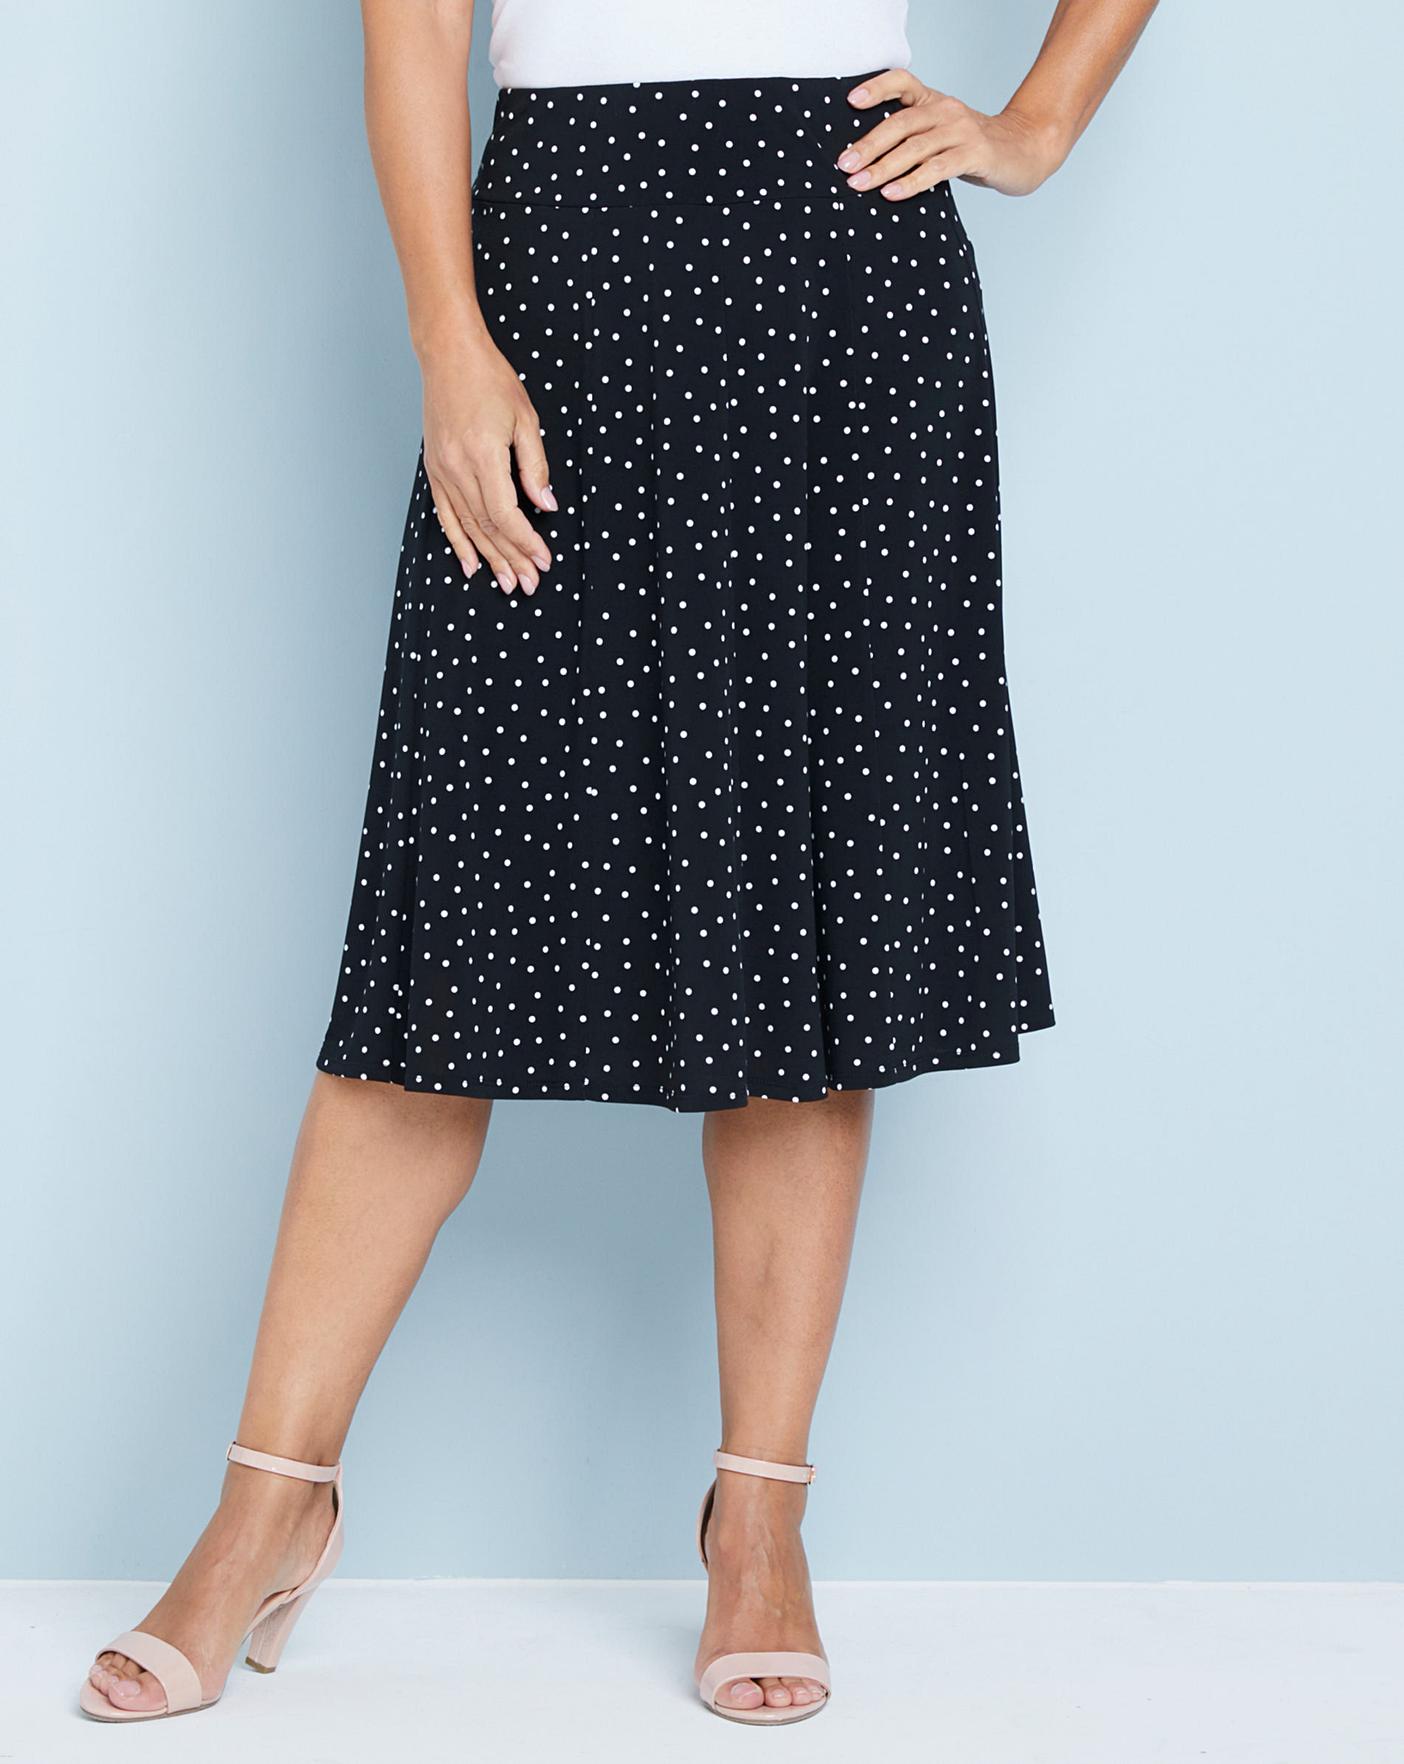 Julipa Print Fit and Flare Skirt 25inch | Oxendales